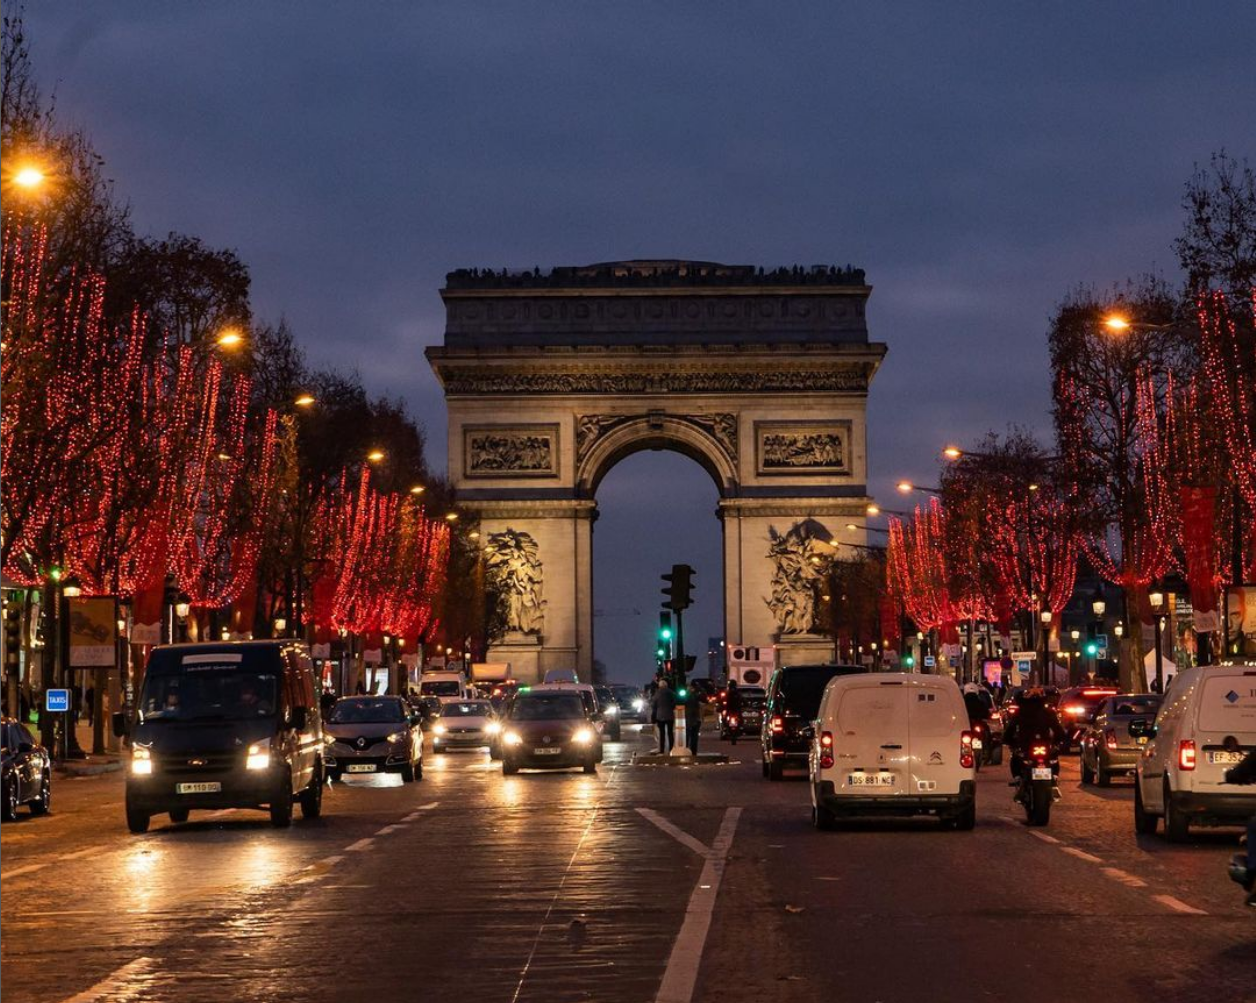 view of arc de triomphe from champs elysees in paris